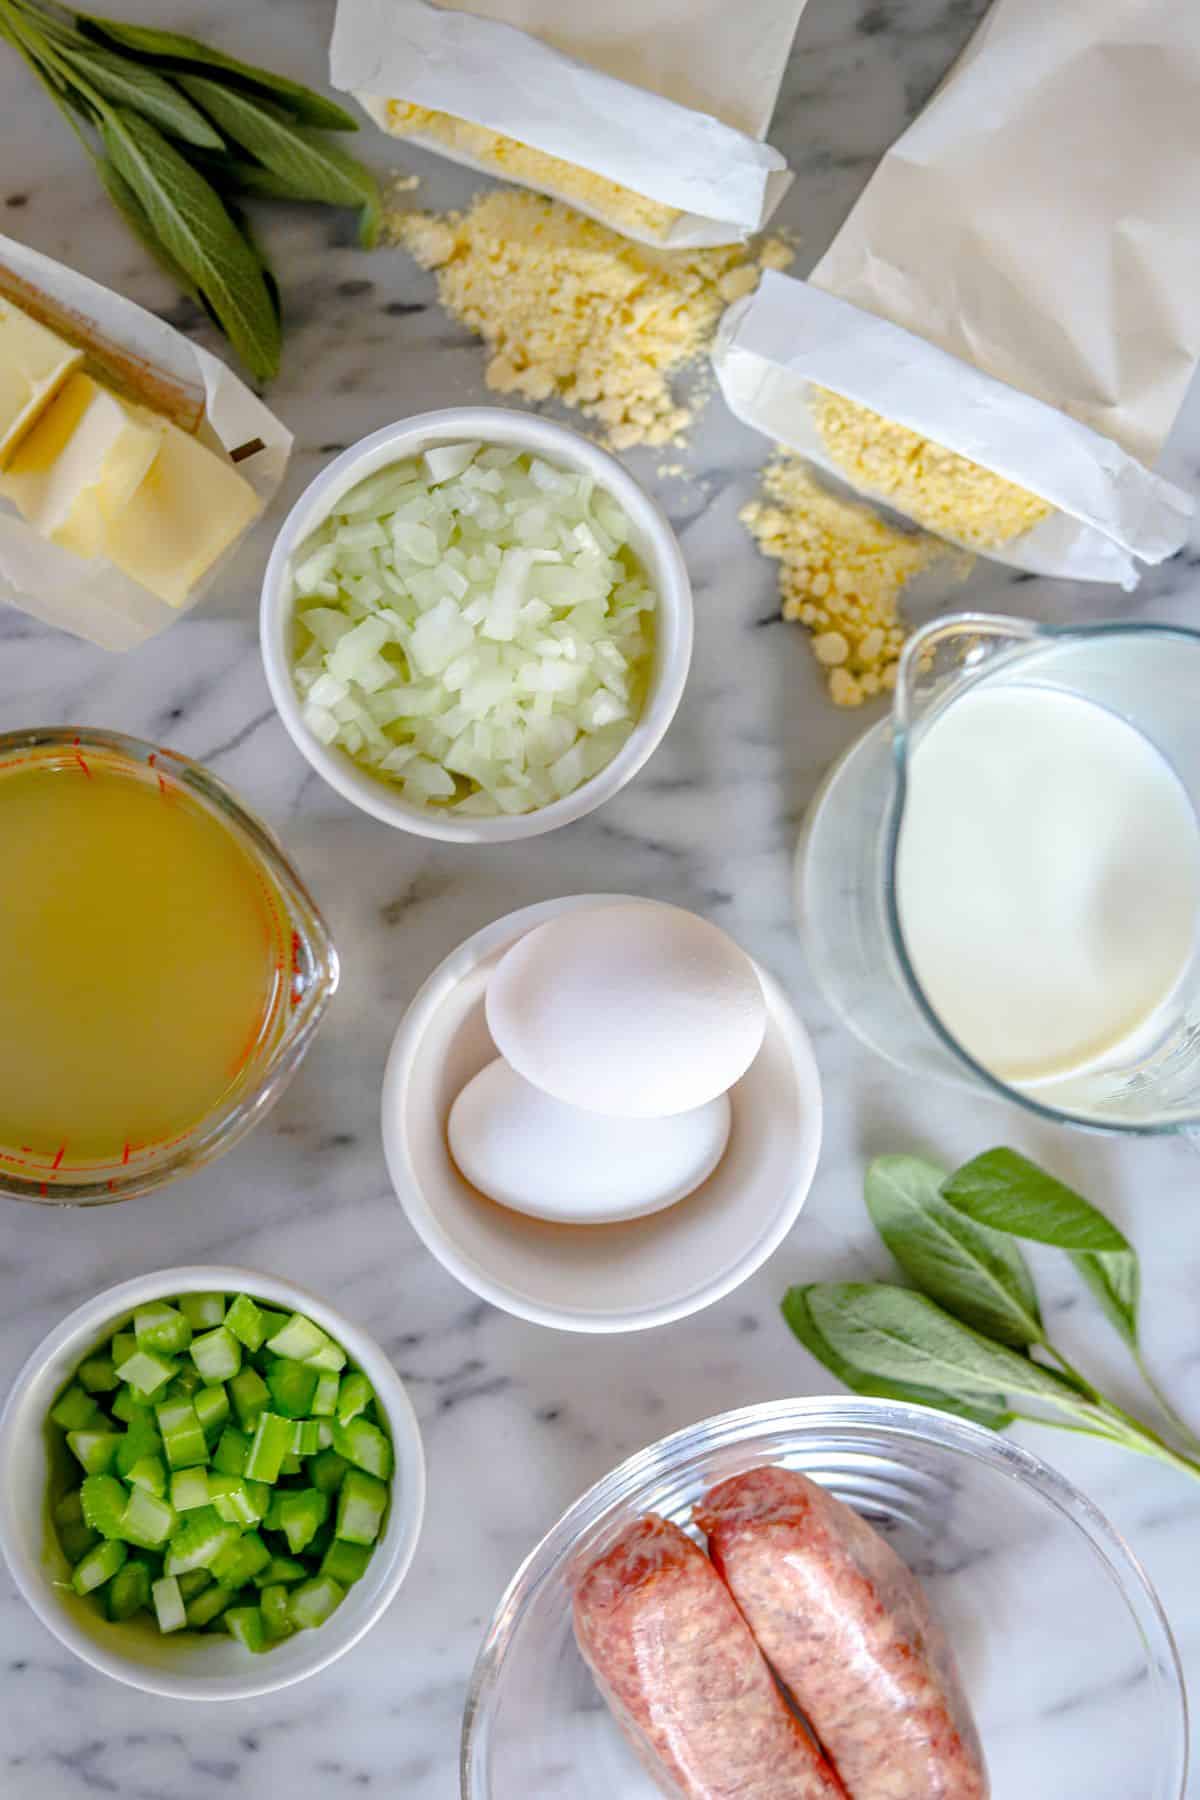 Jiffy cornbread dressing ingredients - salted butter, fresh sage, 2 packets of jiffy corn muffin mix, milk, eggs, chicken broth, chopped celery, chopped onions, sausage links.